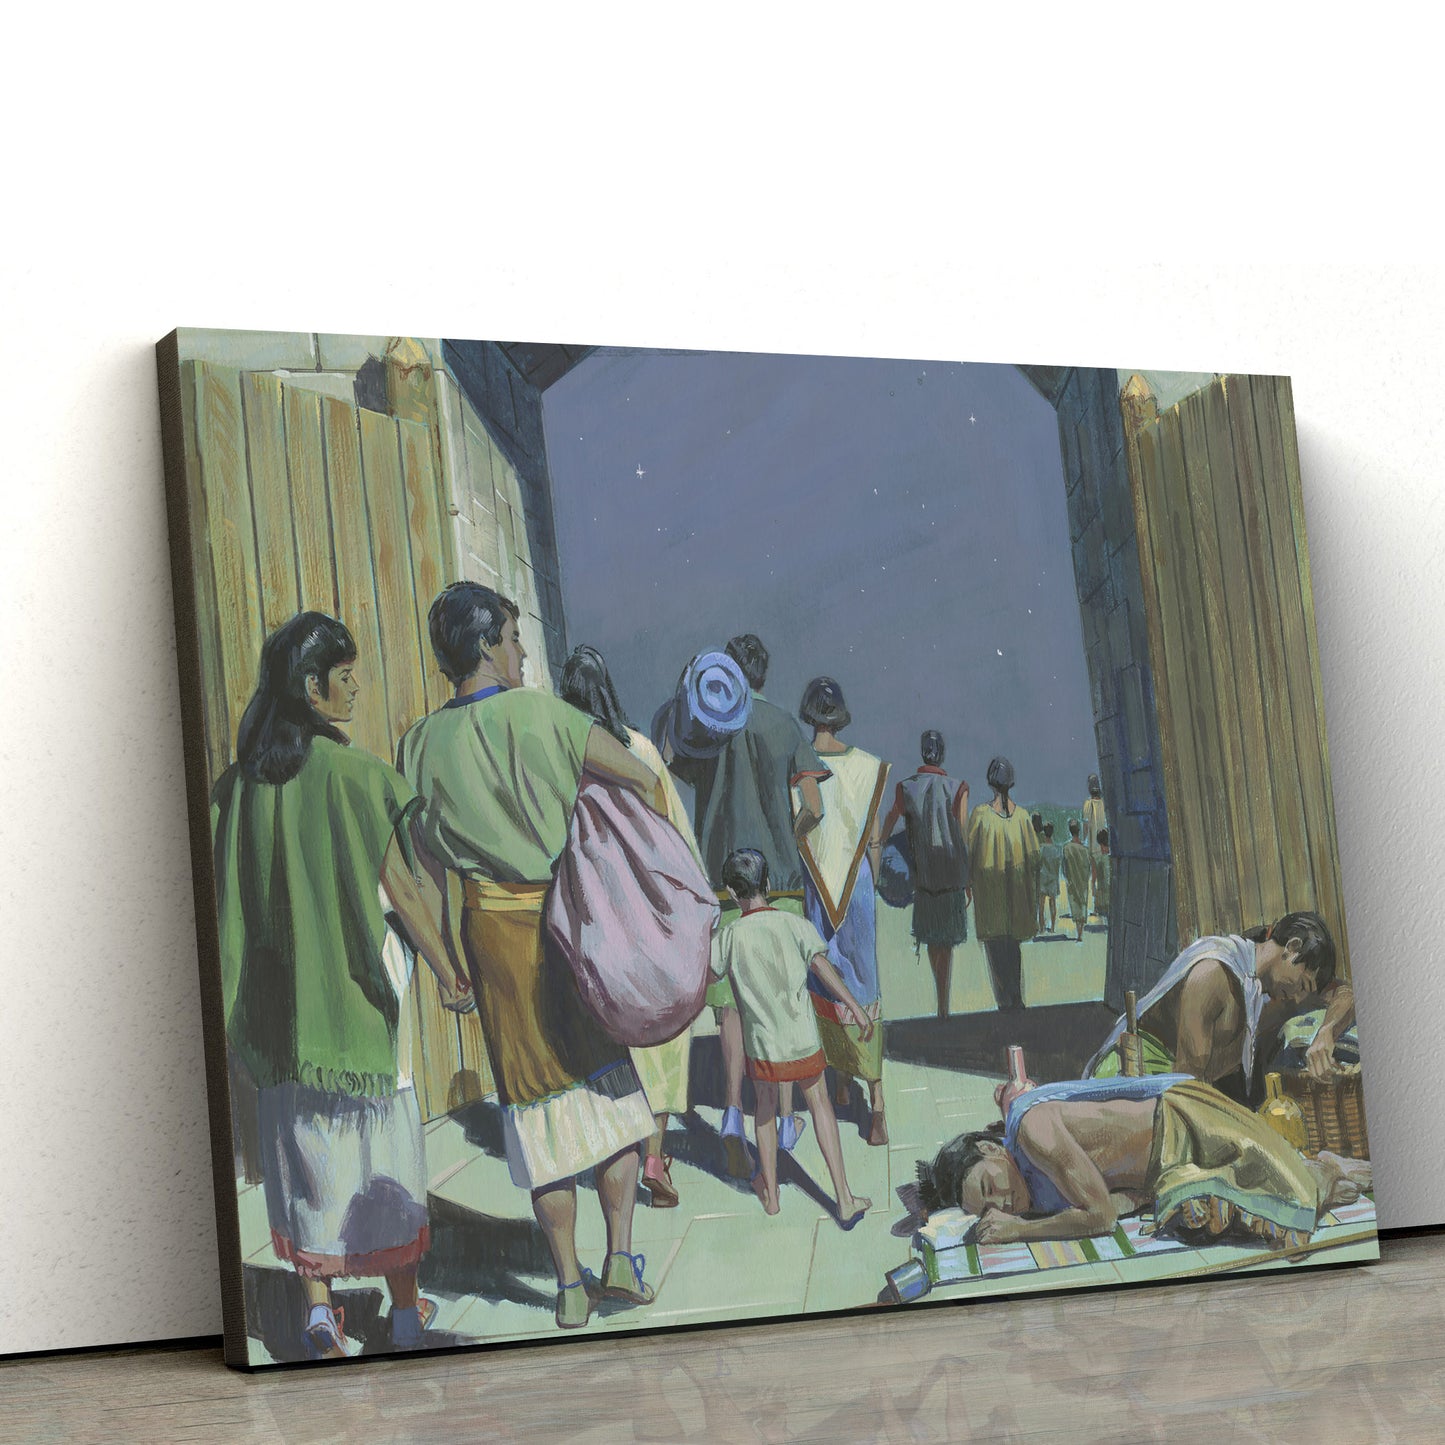 King Limhi’s People Escape Canvas Pictures - Christian Paintings For Home - Religious Canvas Wall Decor